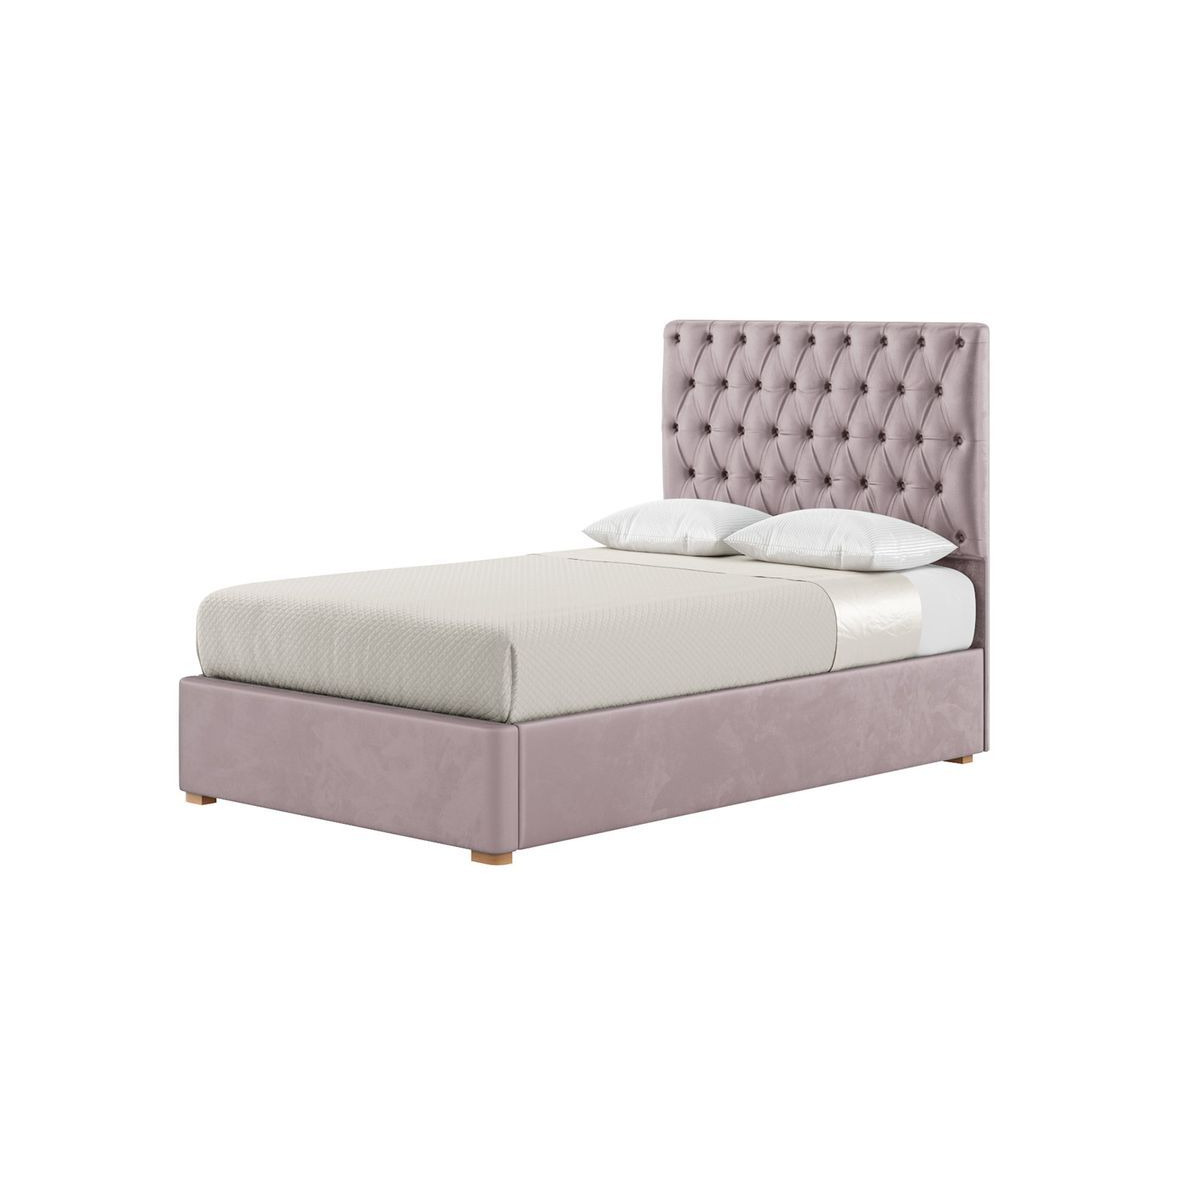 Jewel 4ft Small Double Bed Frame With Luxury Deep Button Quilted Headboard, lilac, Leg colour: like oak - image 1